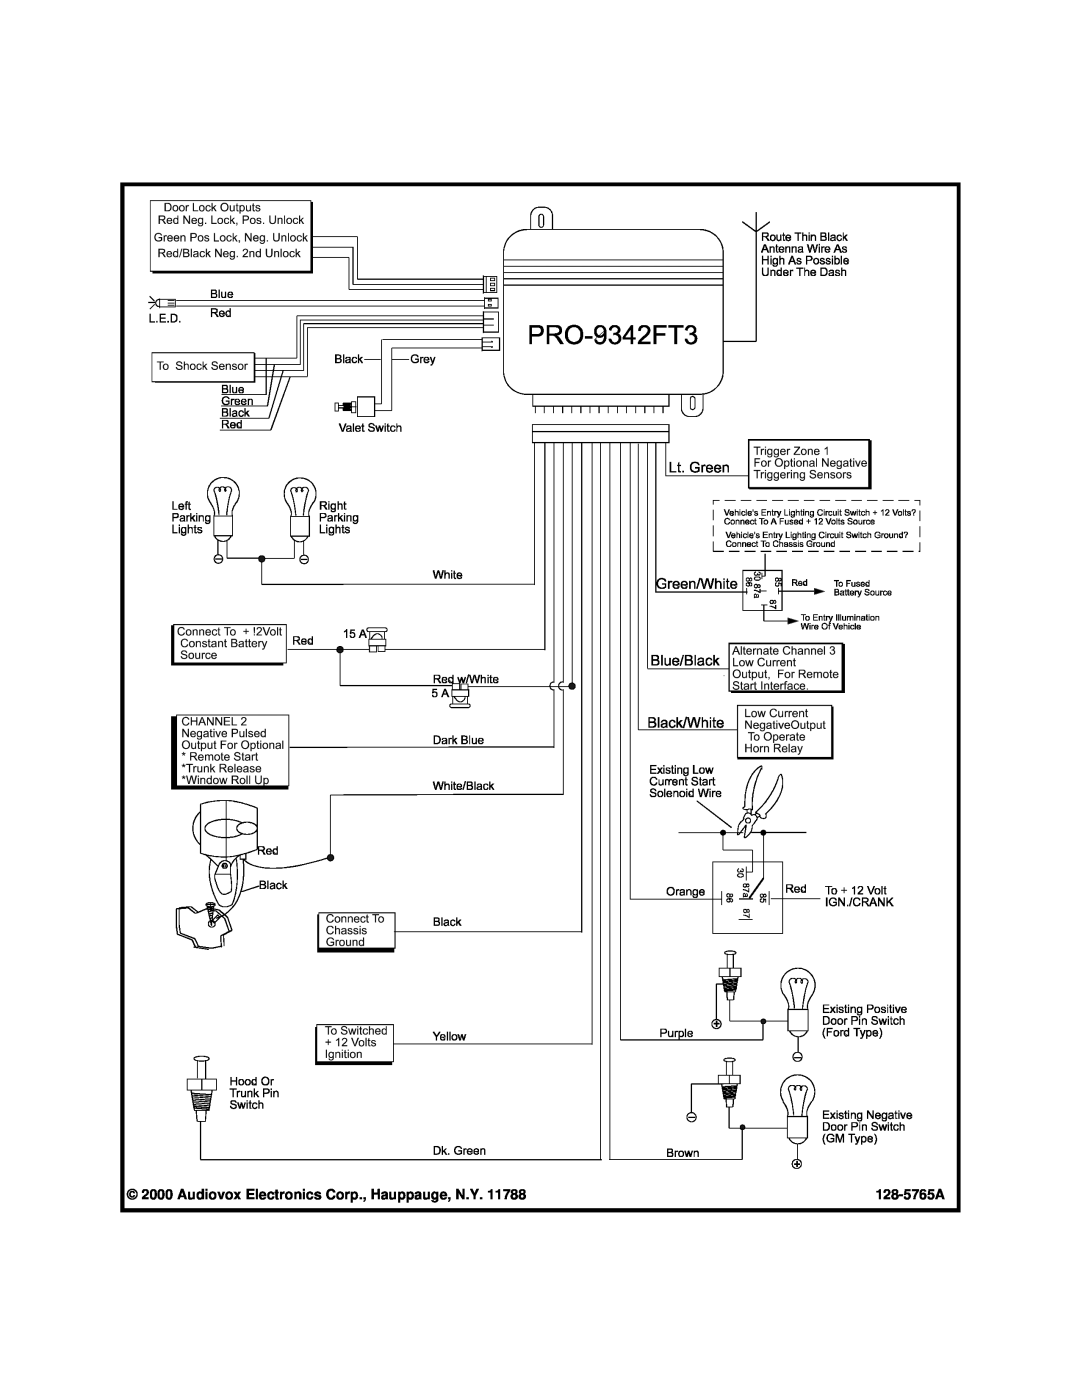 Audiovox PRO-9342FT3 installation manual Audiovox Electronics Corp., Hauppauge, N.Y, 128-5765A 